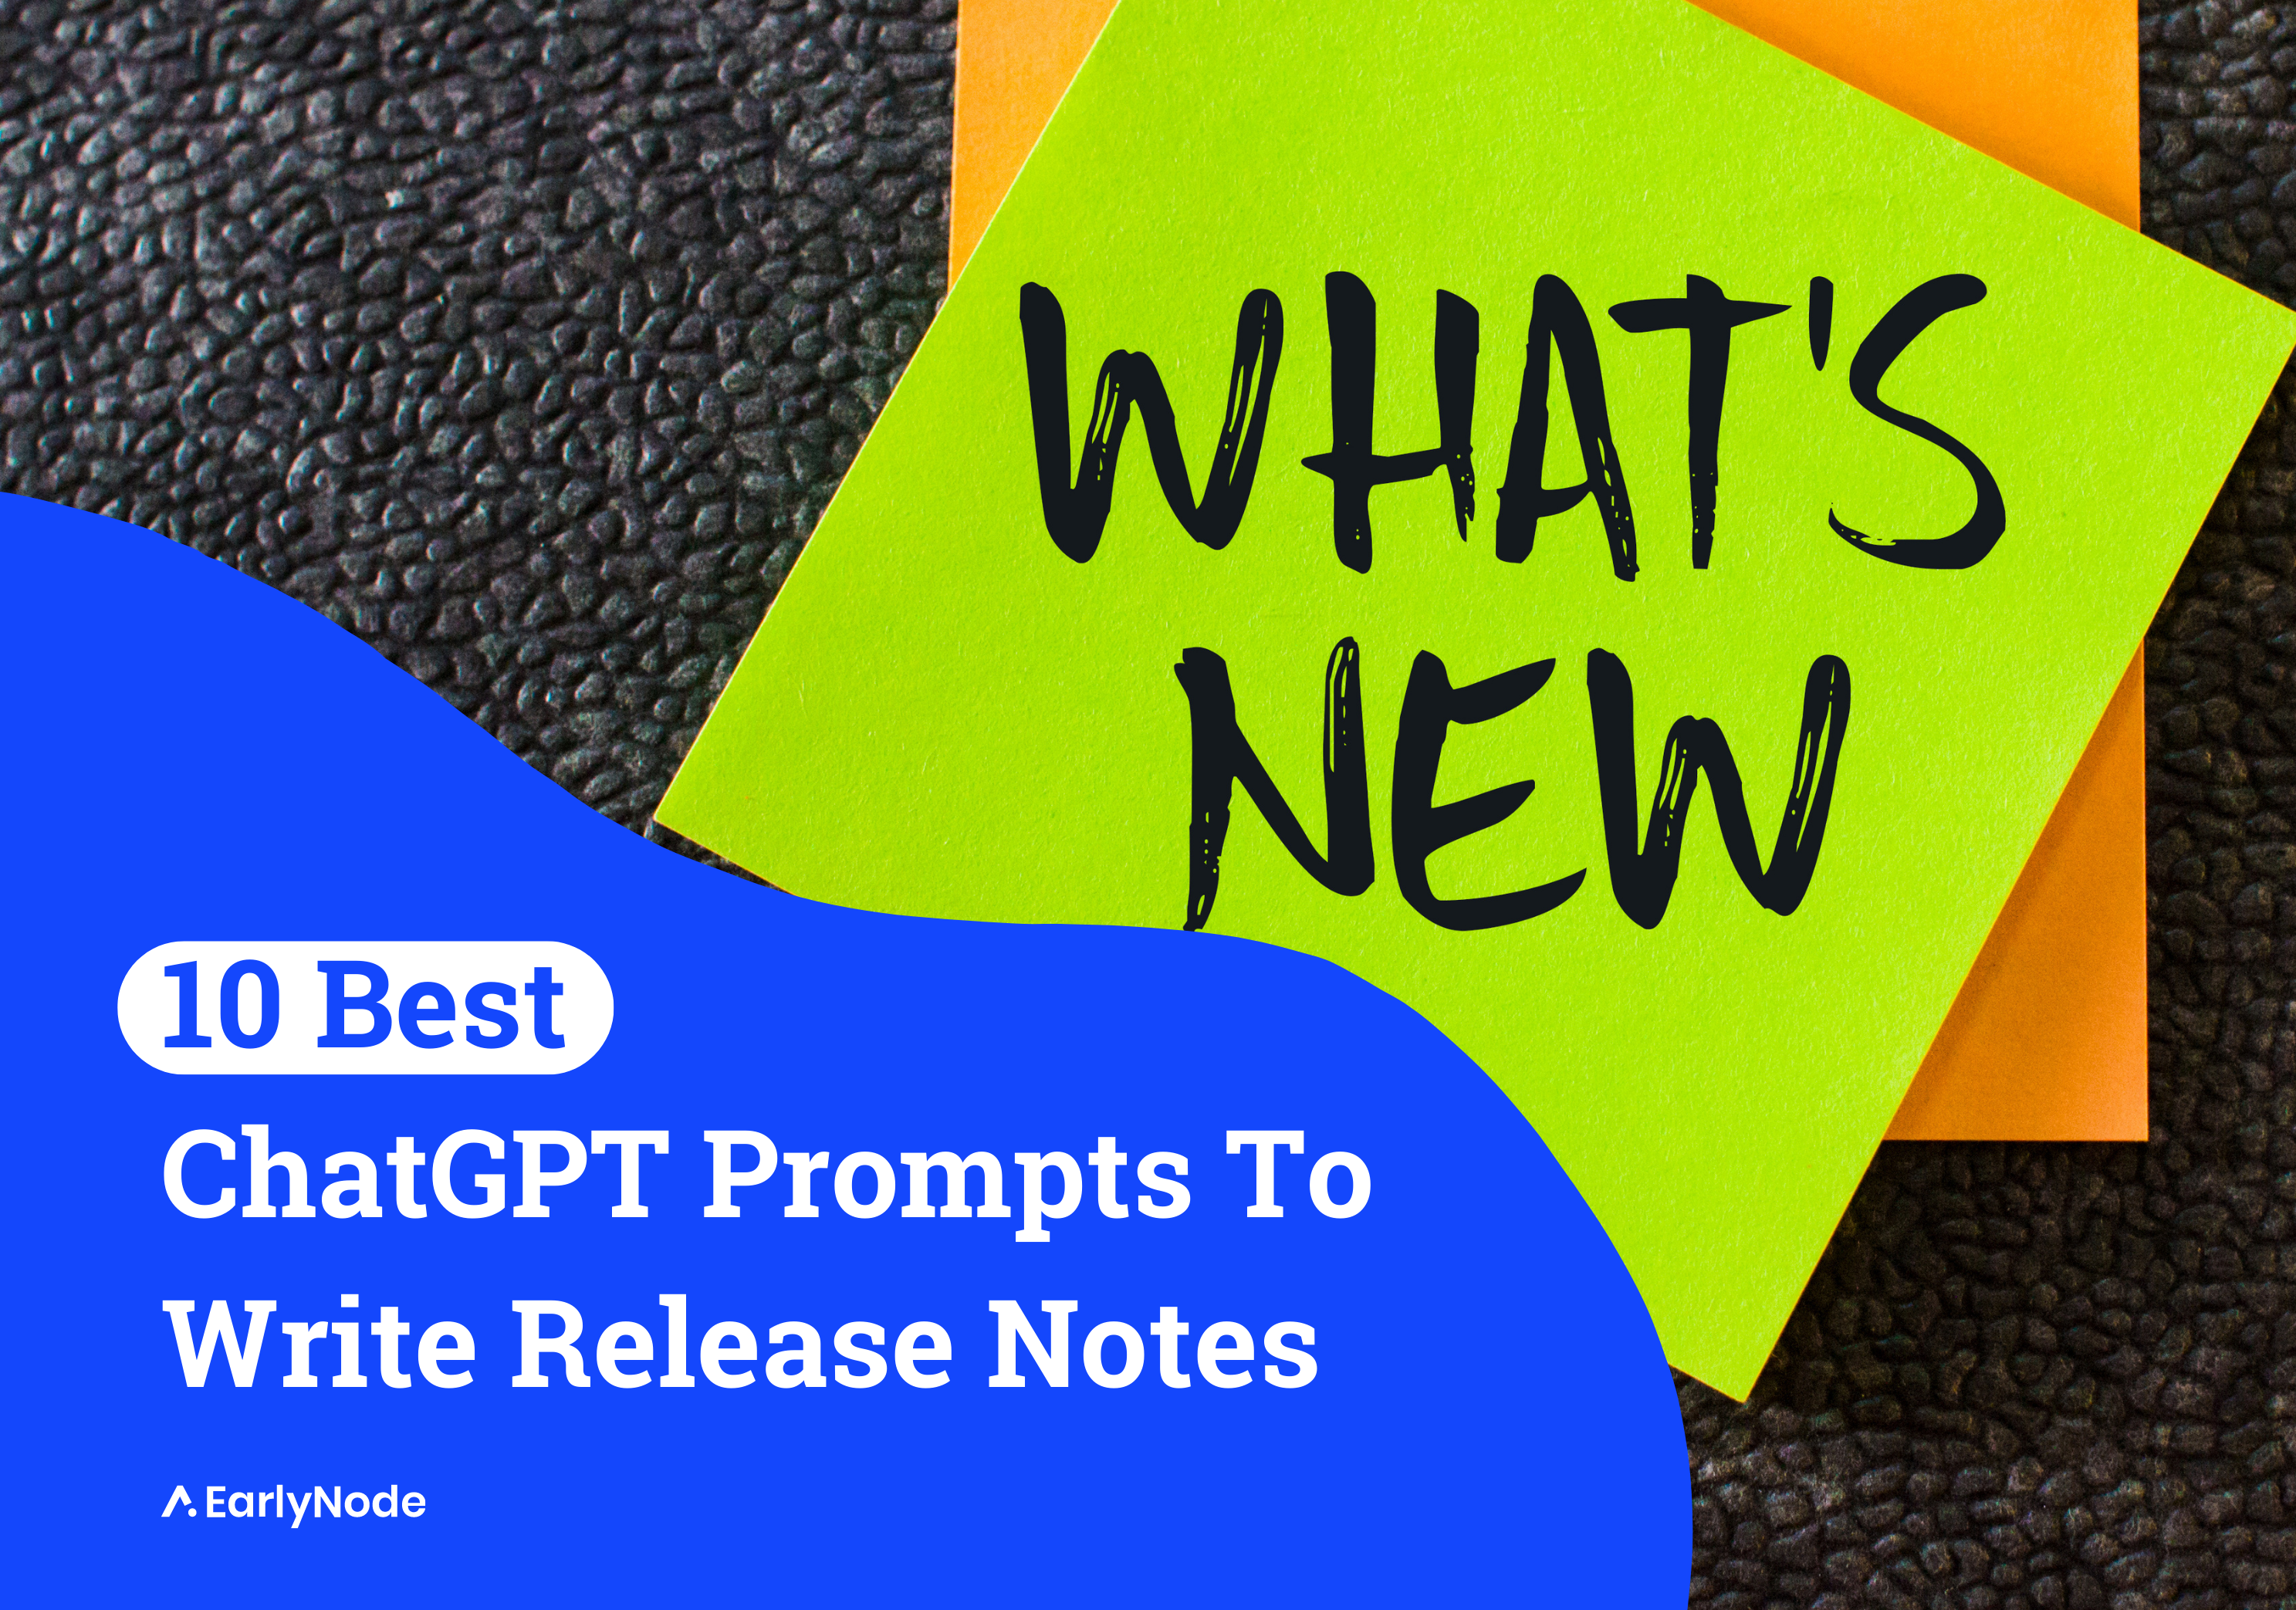 10 Best ChatGPT Prompts To Write Effective Release Notes